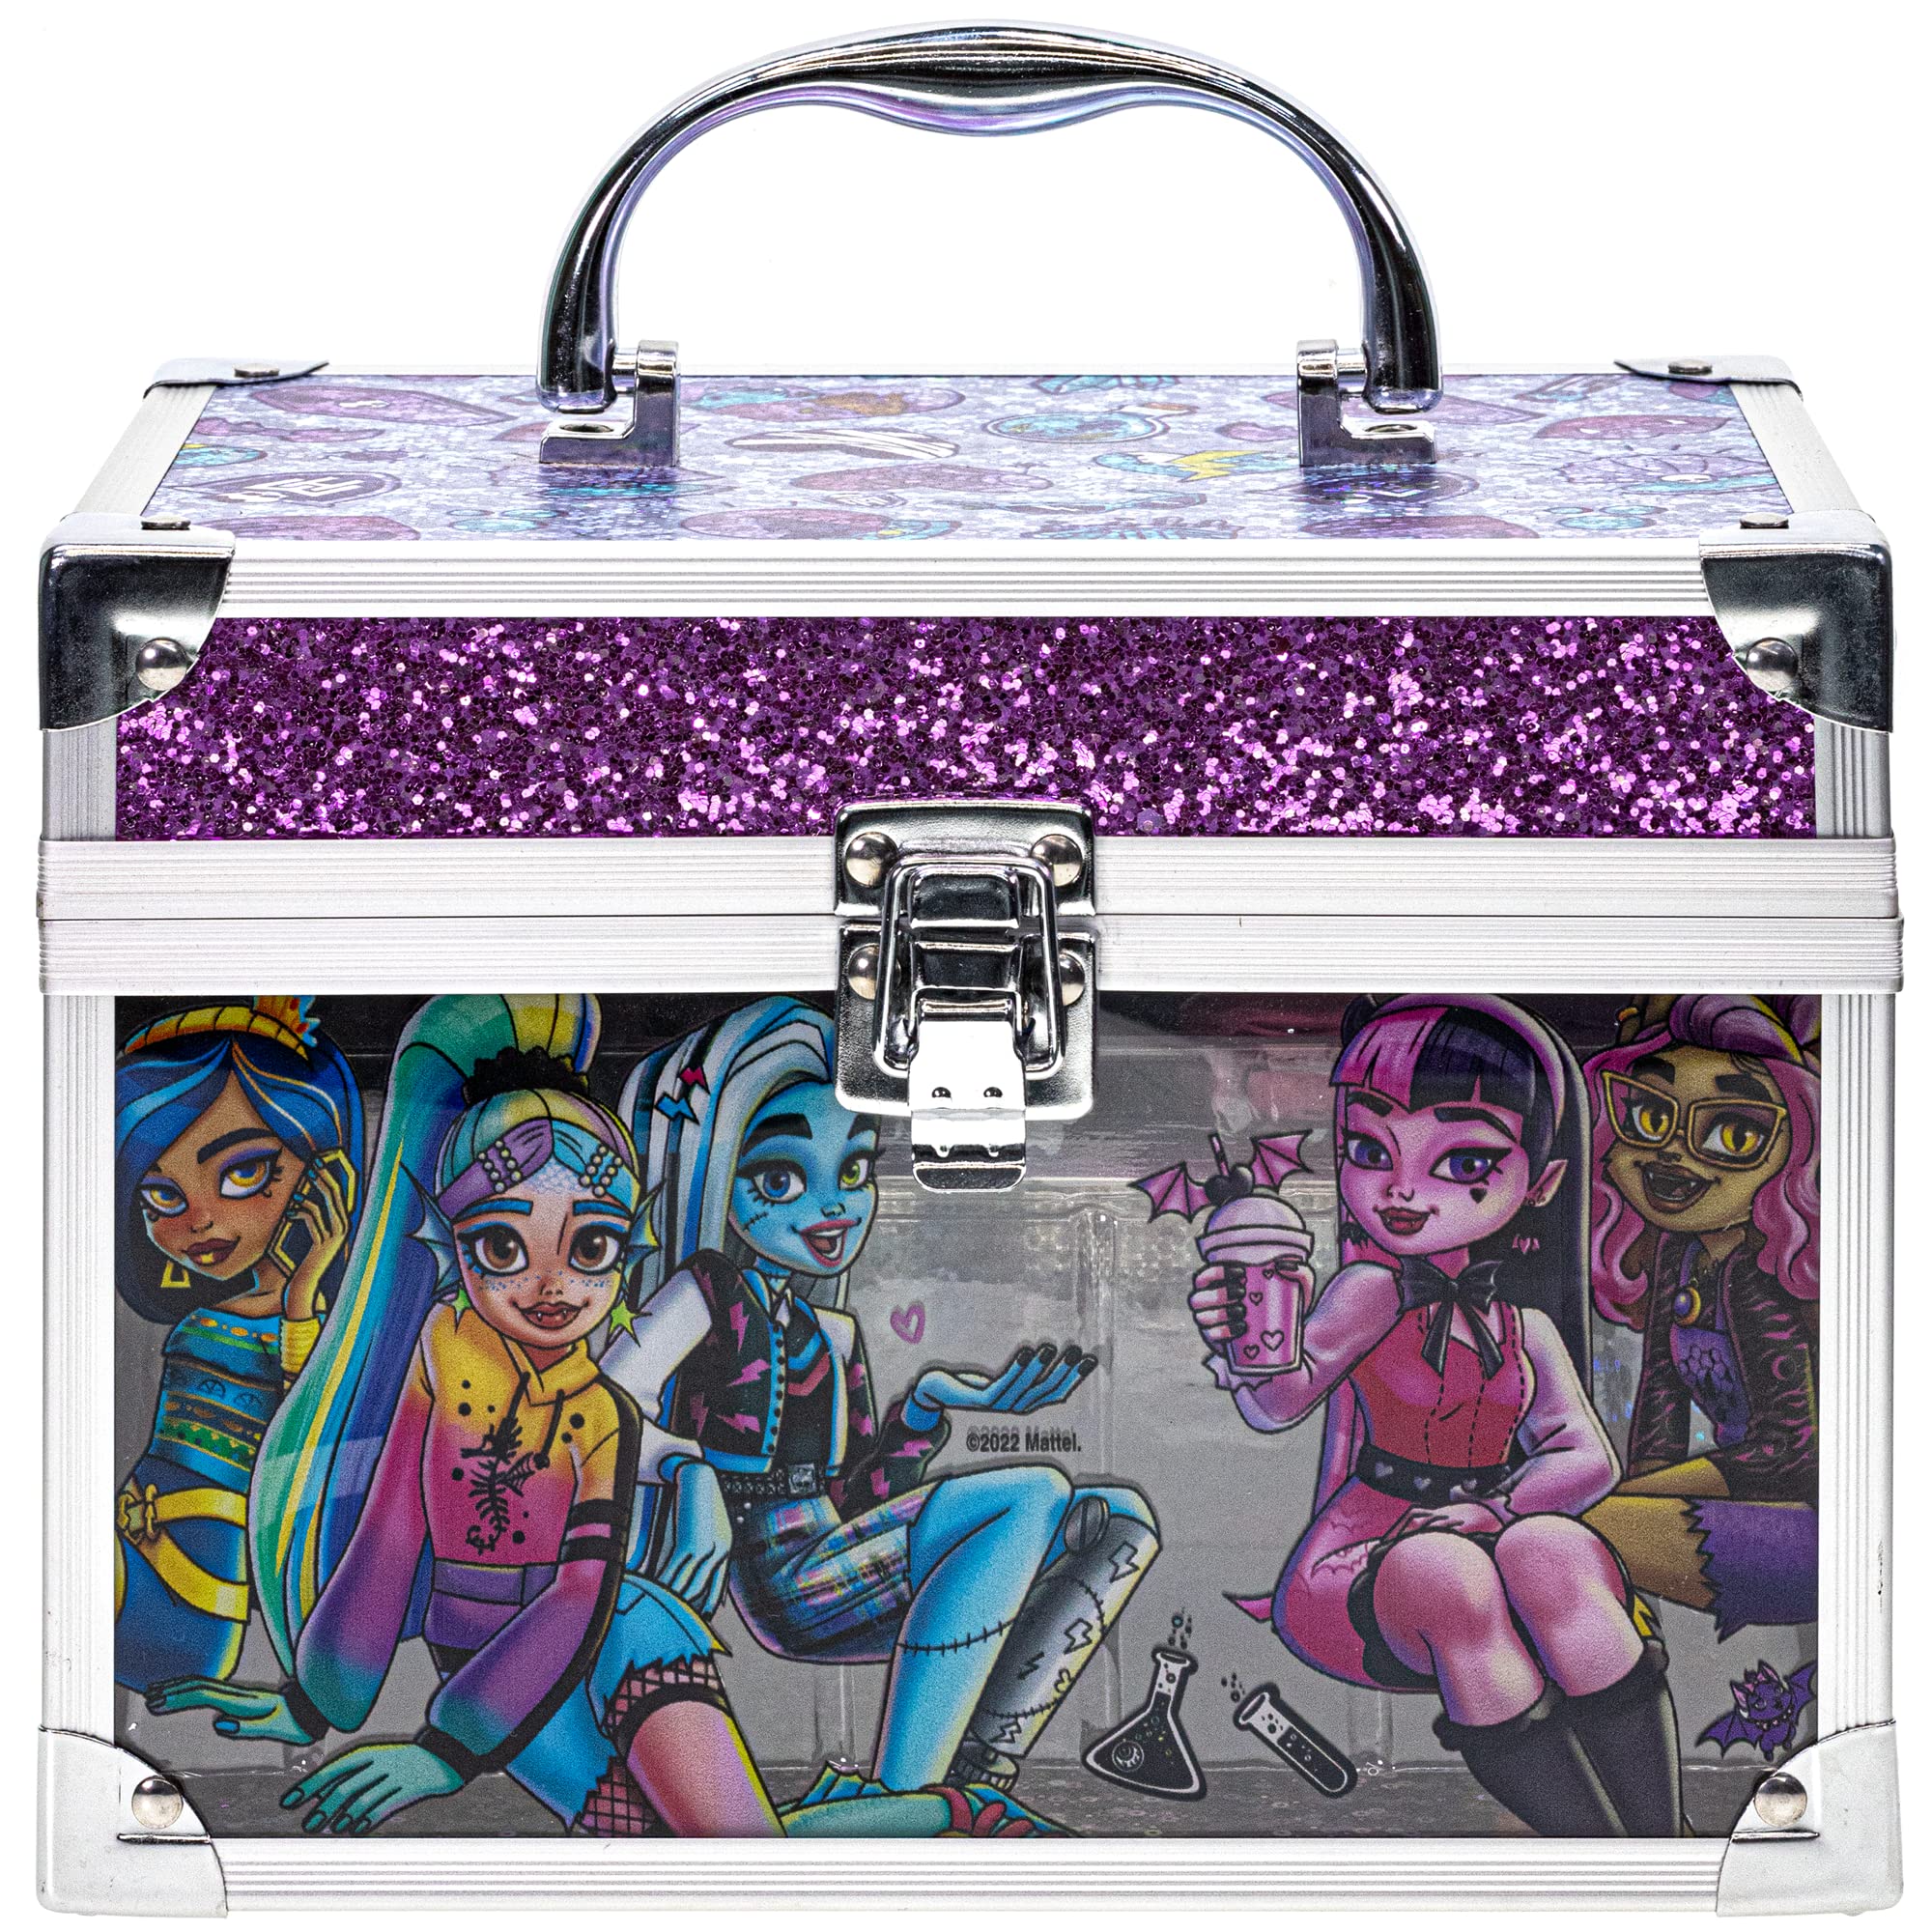 Lol Surprise Townley Girl Train Case Cosmetic Makeup Set for Perfect Kids  Girls